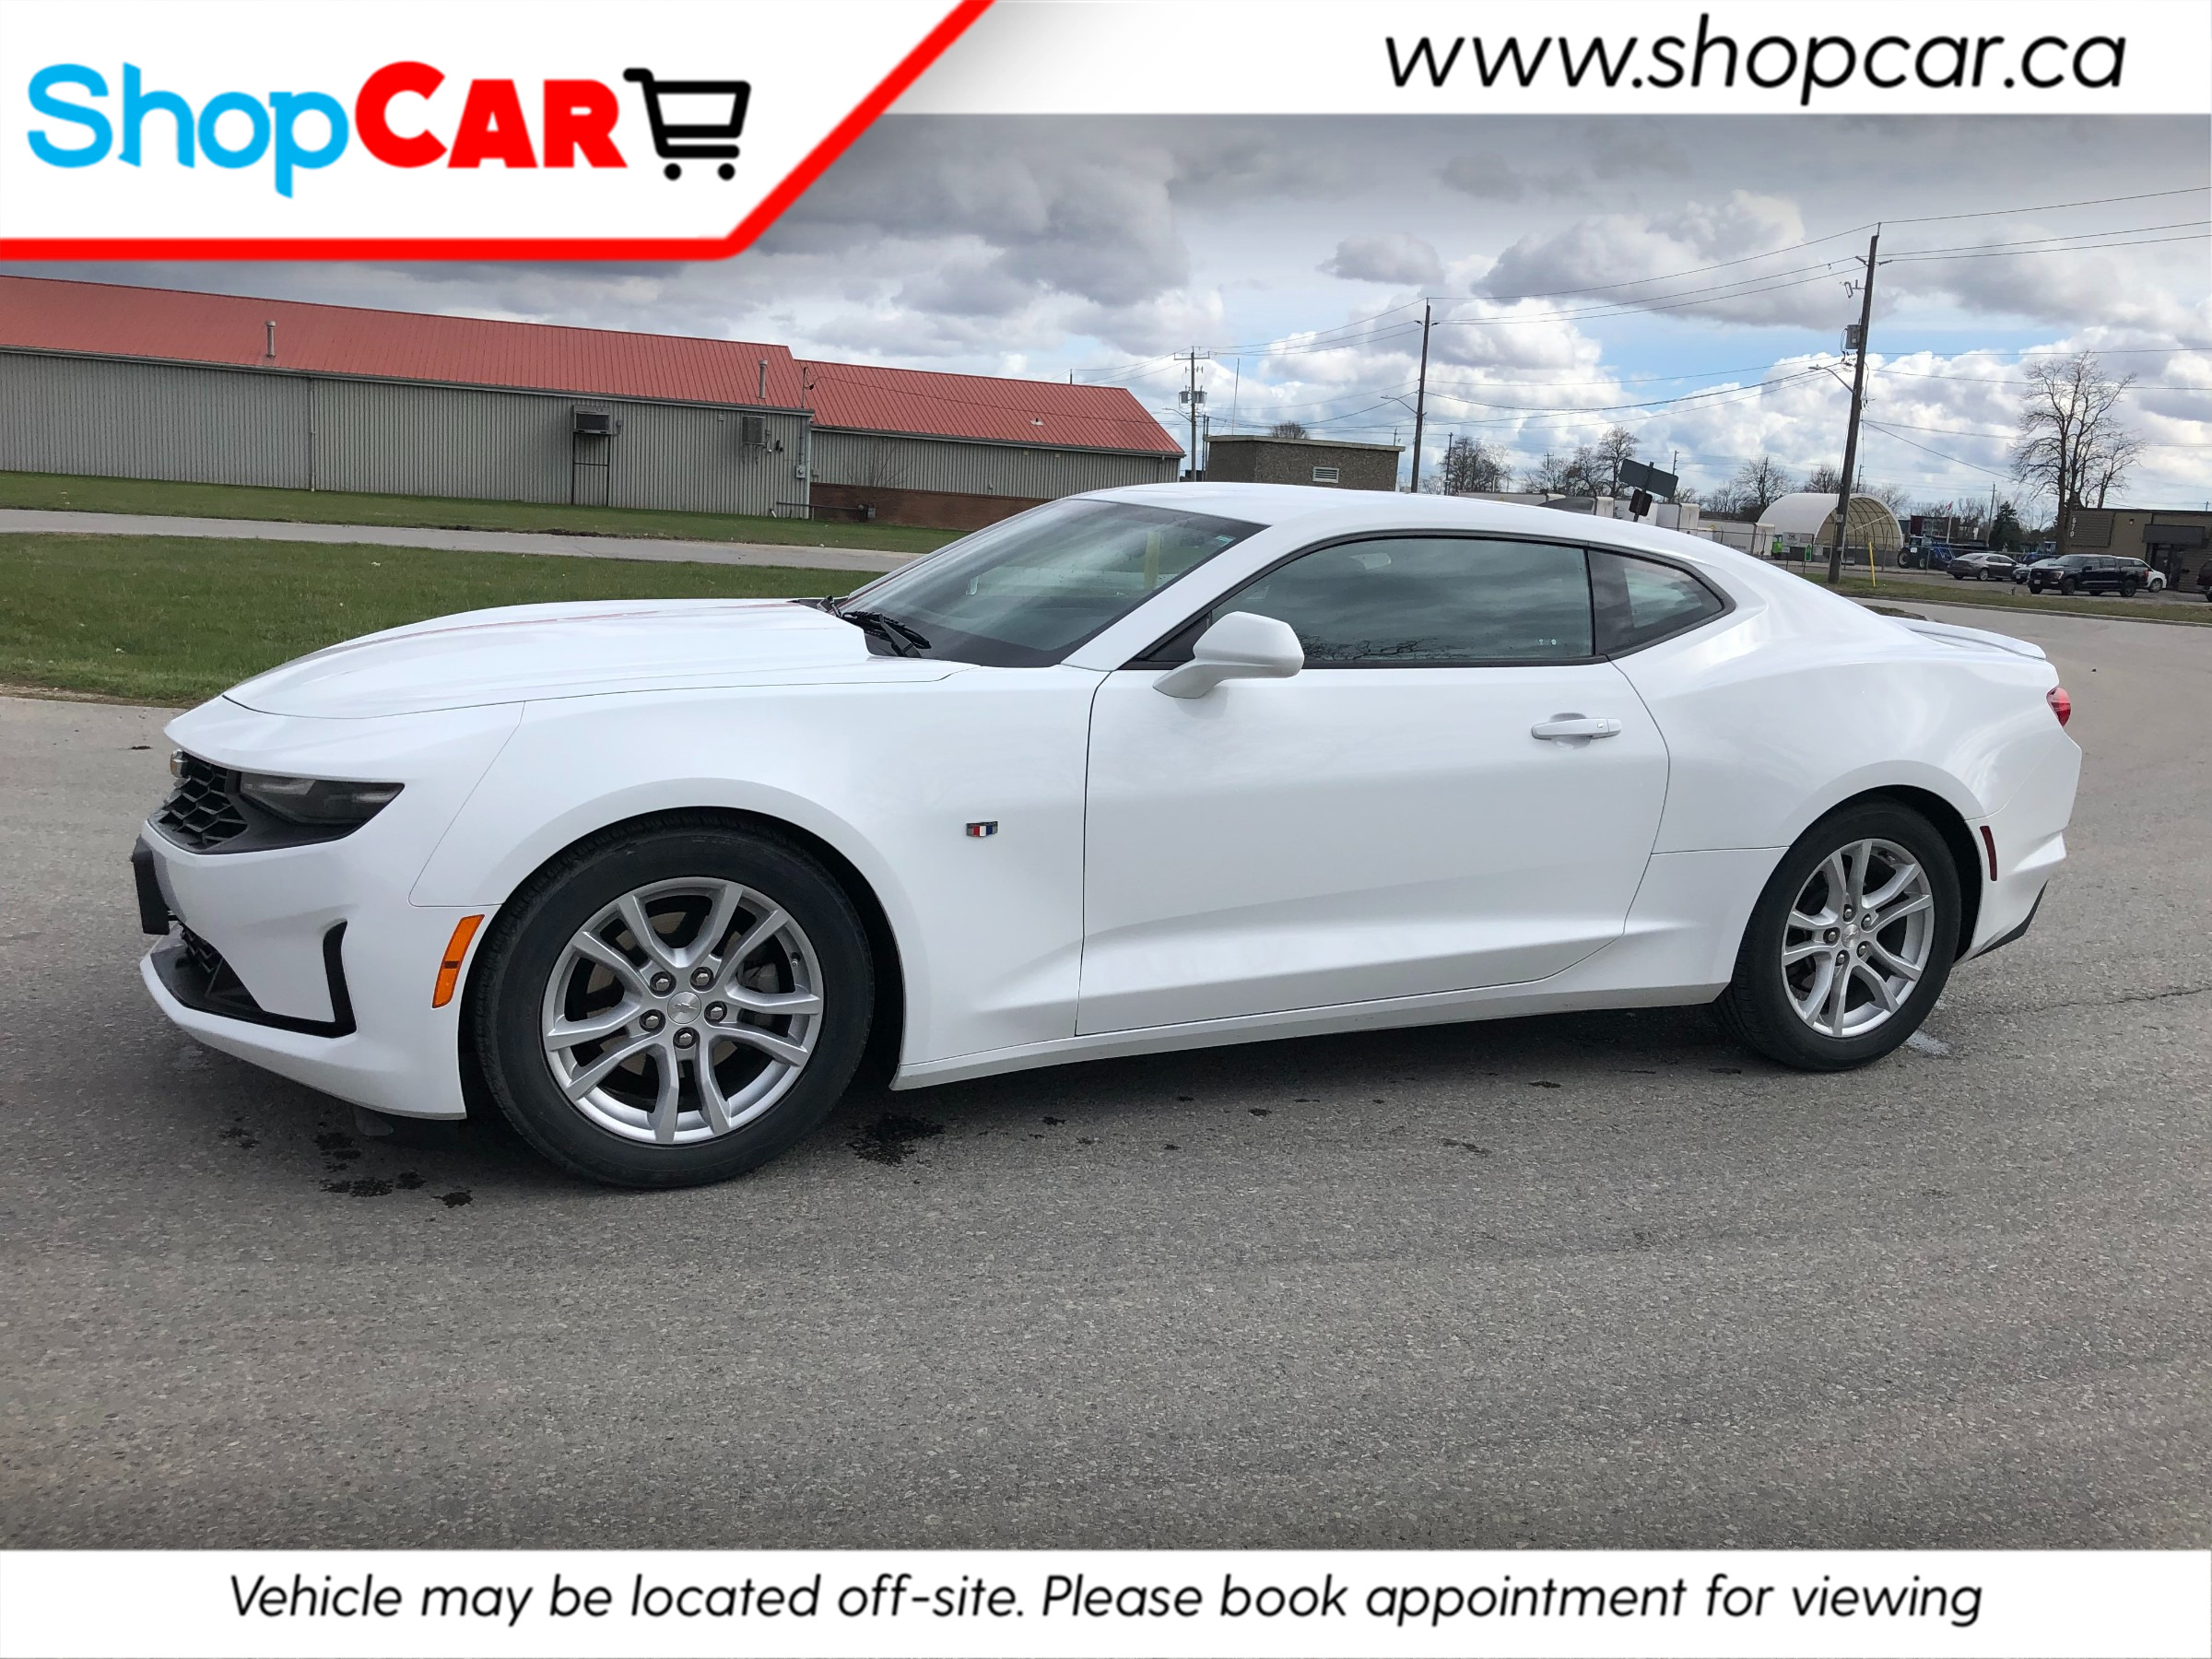 2020 Chevrolet Camaro Price Reduction!  Just in time for Spring!